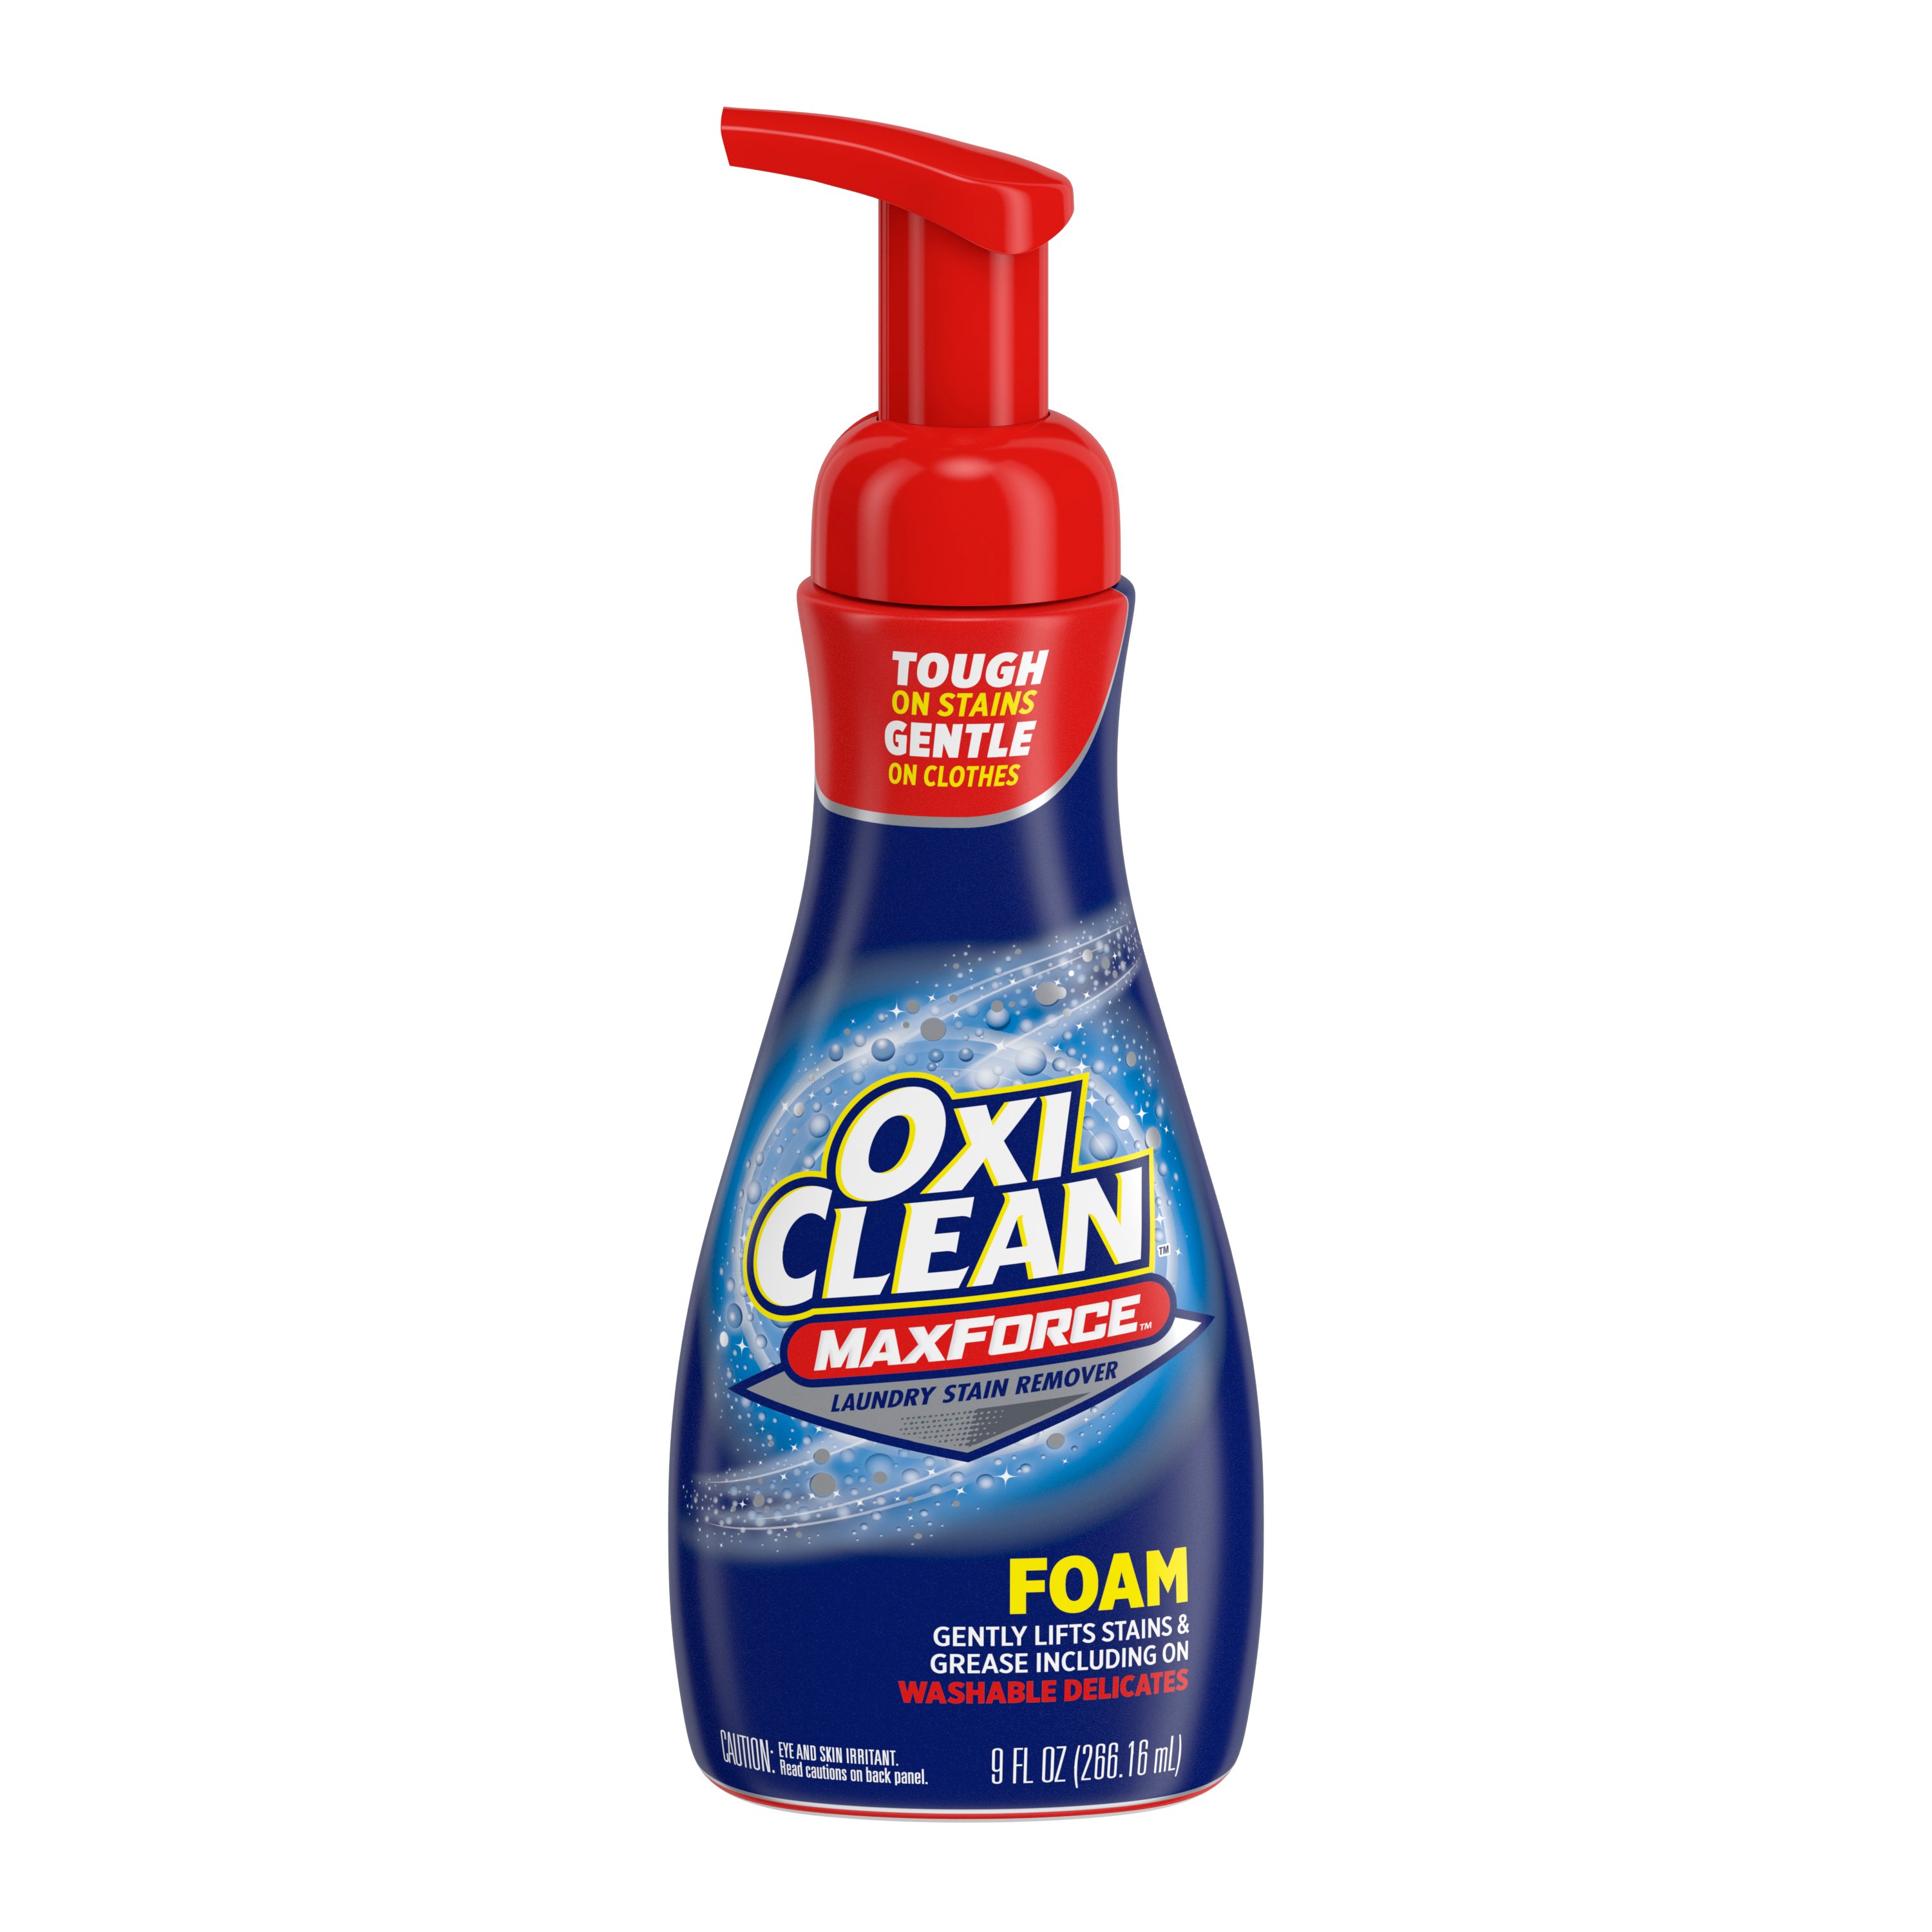 OxiClean Max Force Laundry Stain Remover Gel Stick - Shop Stain Removers at  H-E-B